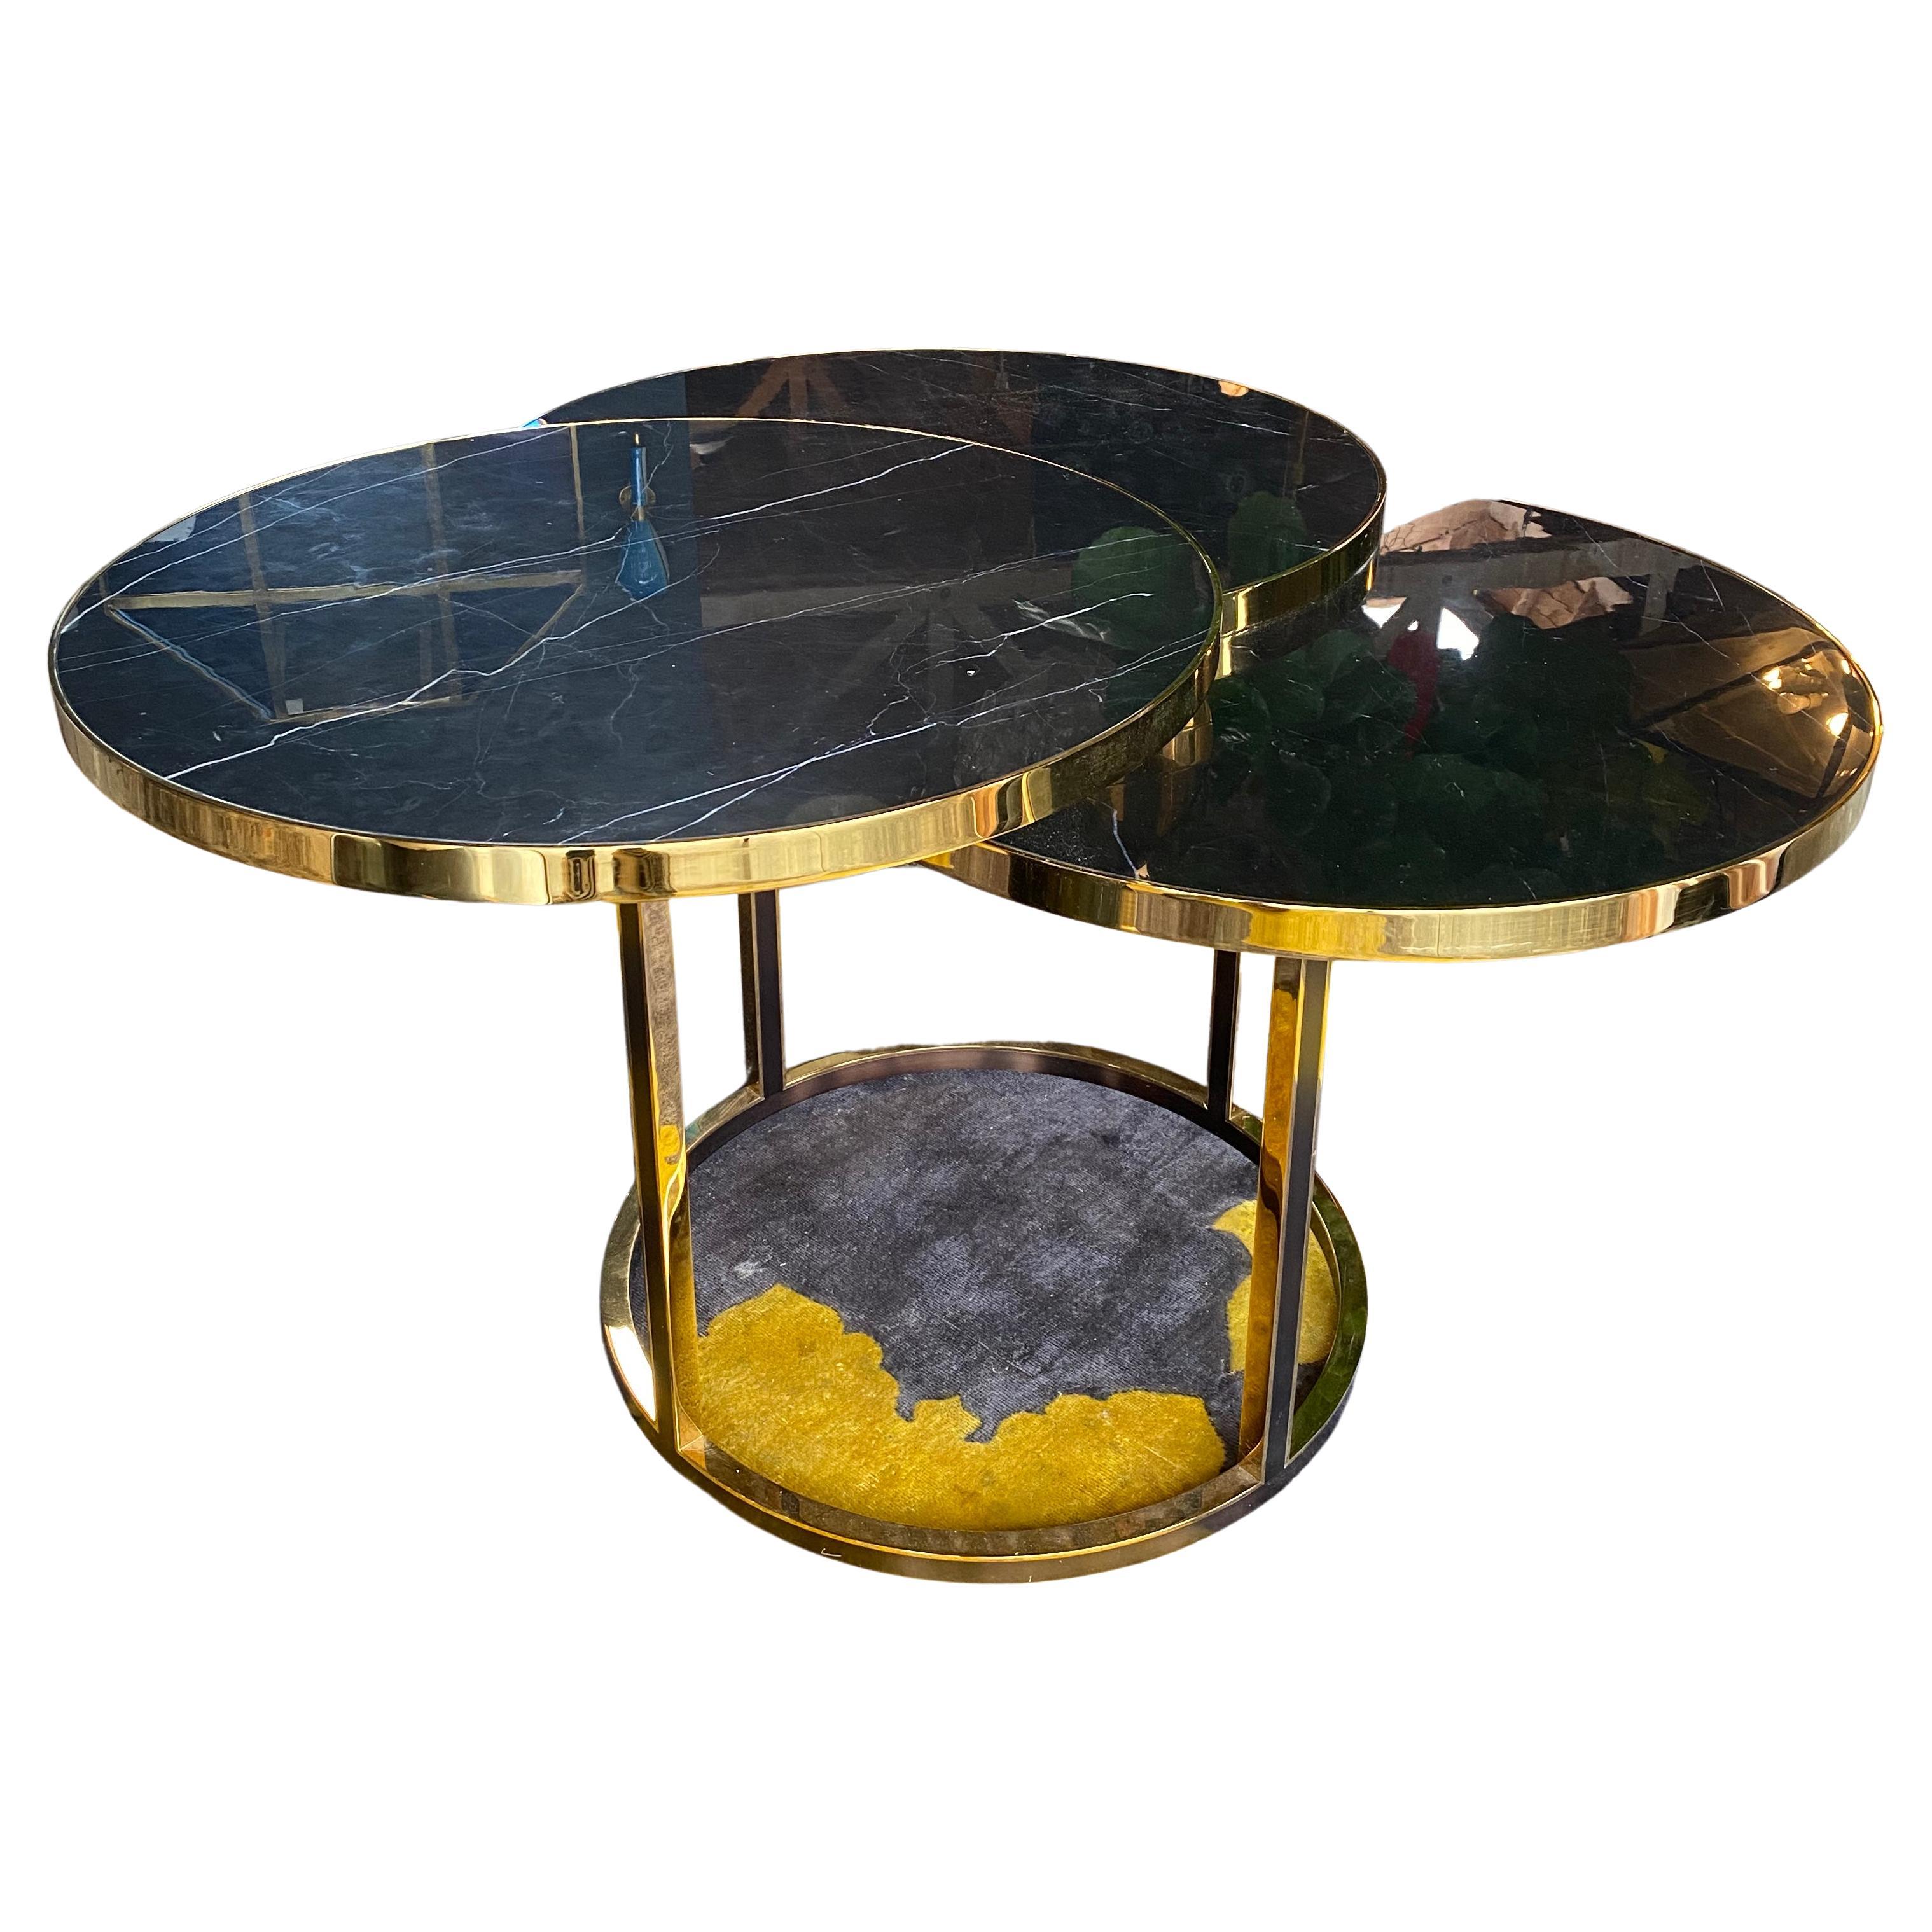 Italian Vintage Marble and Brass Table, 1980s by Alexander McQueen